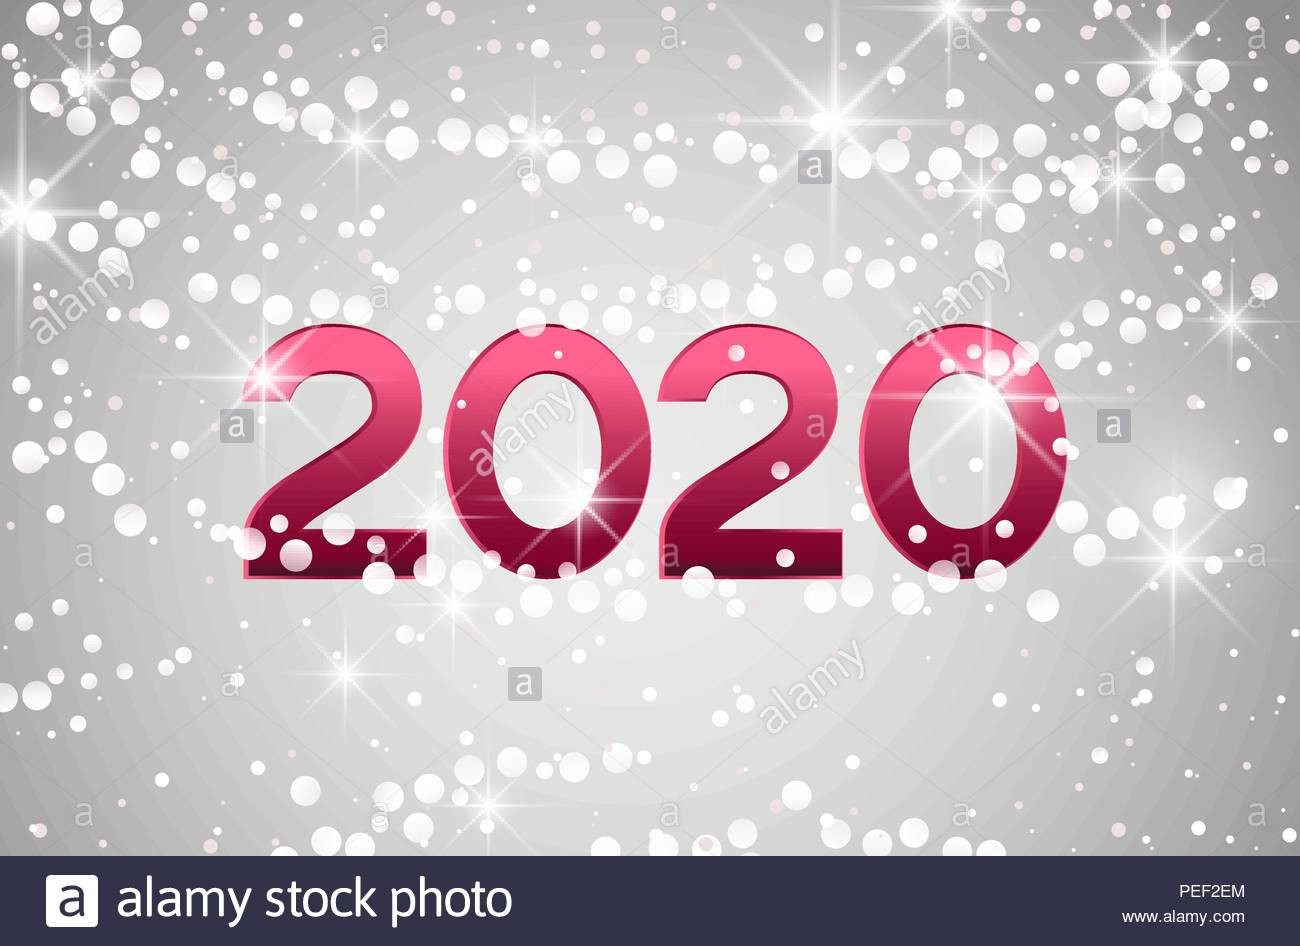 Christmas Party Theme Ideas 2020
 Vector Image Merry Christmas And Happy New Year 2020